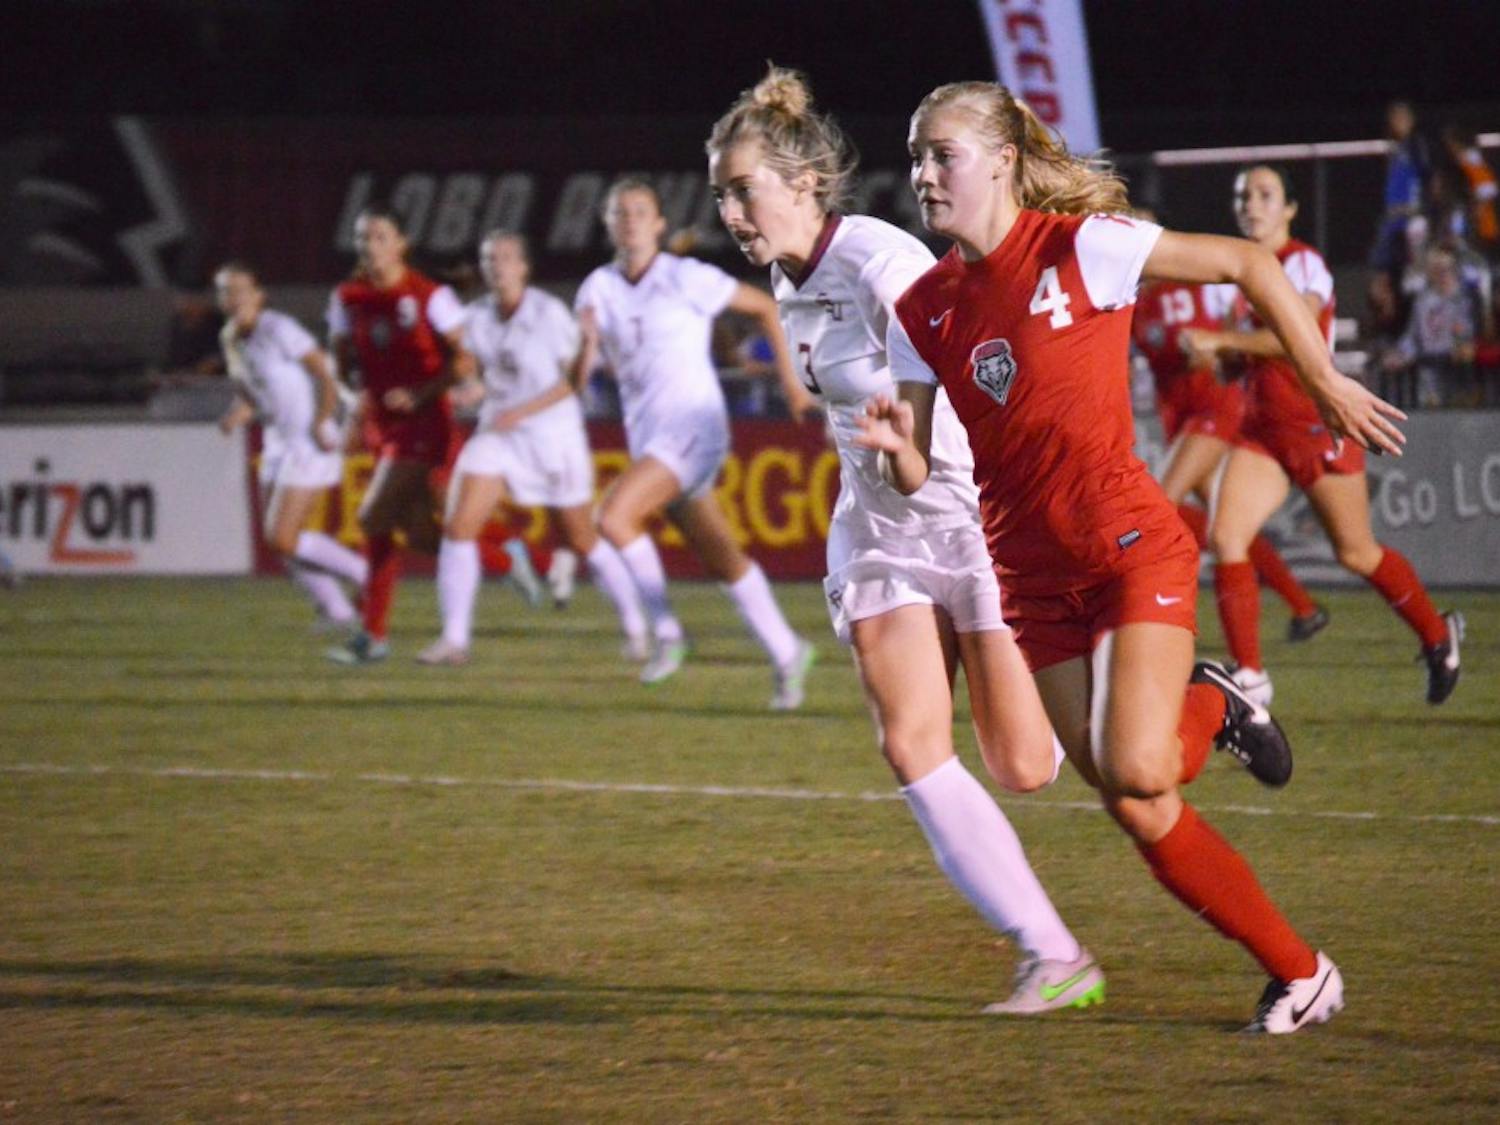 New Mexico midfielder Lindsey Guice (4) chases after the ball alongside a Florida State defender during their game Aug. 21 at the UNM Soccer Complex. Off to a 1-3 start, the Lobos host Idaho State at 2 p.m. Thursday.